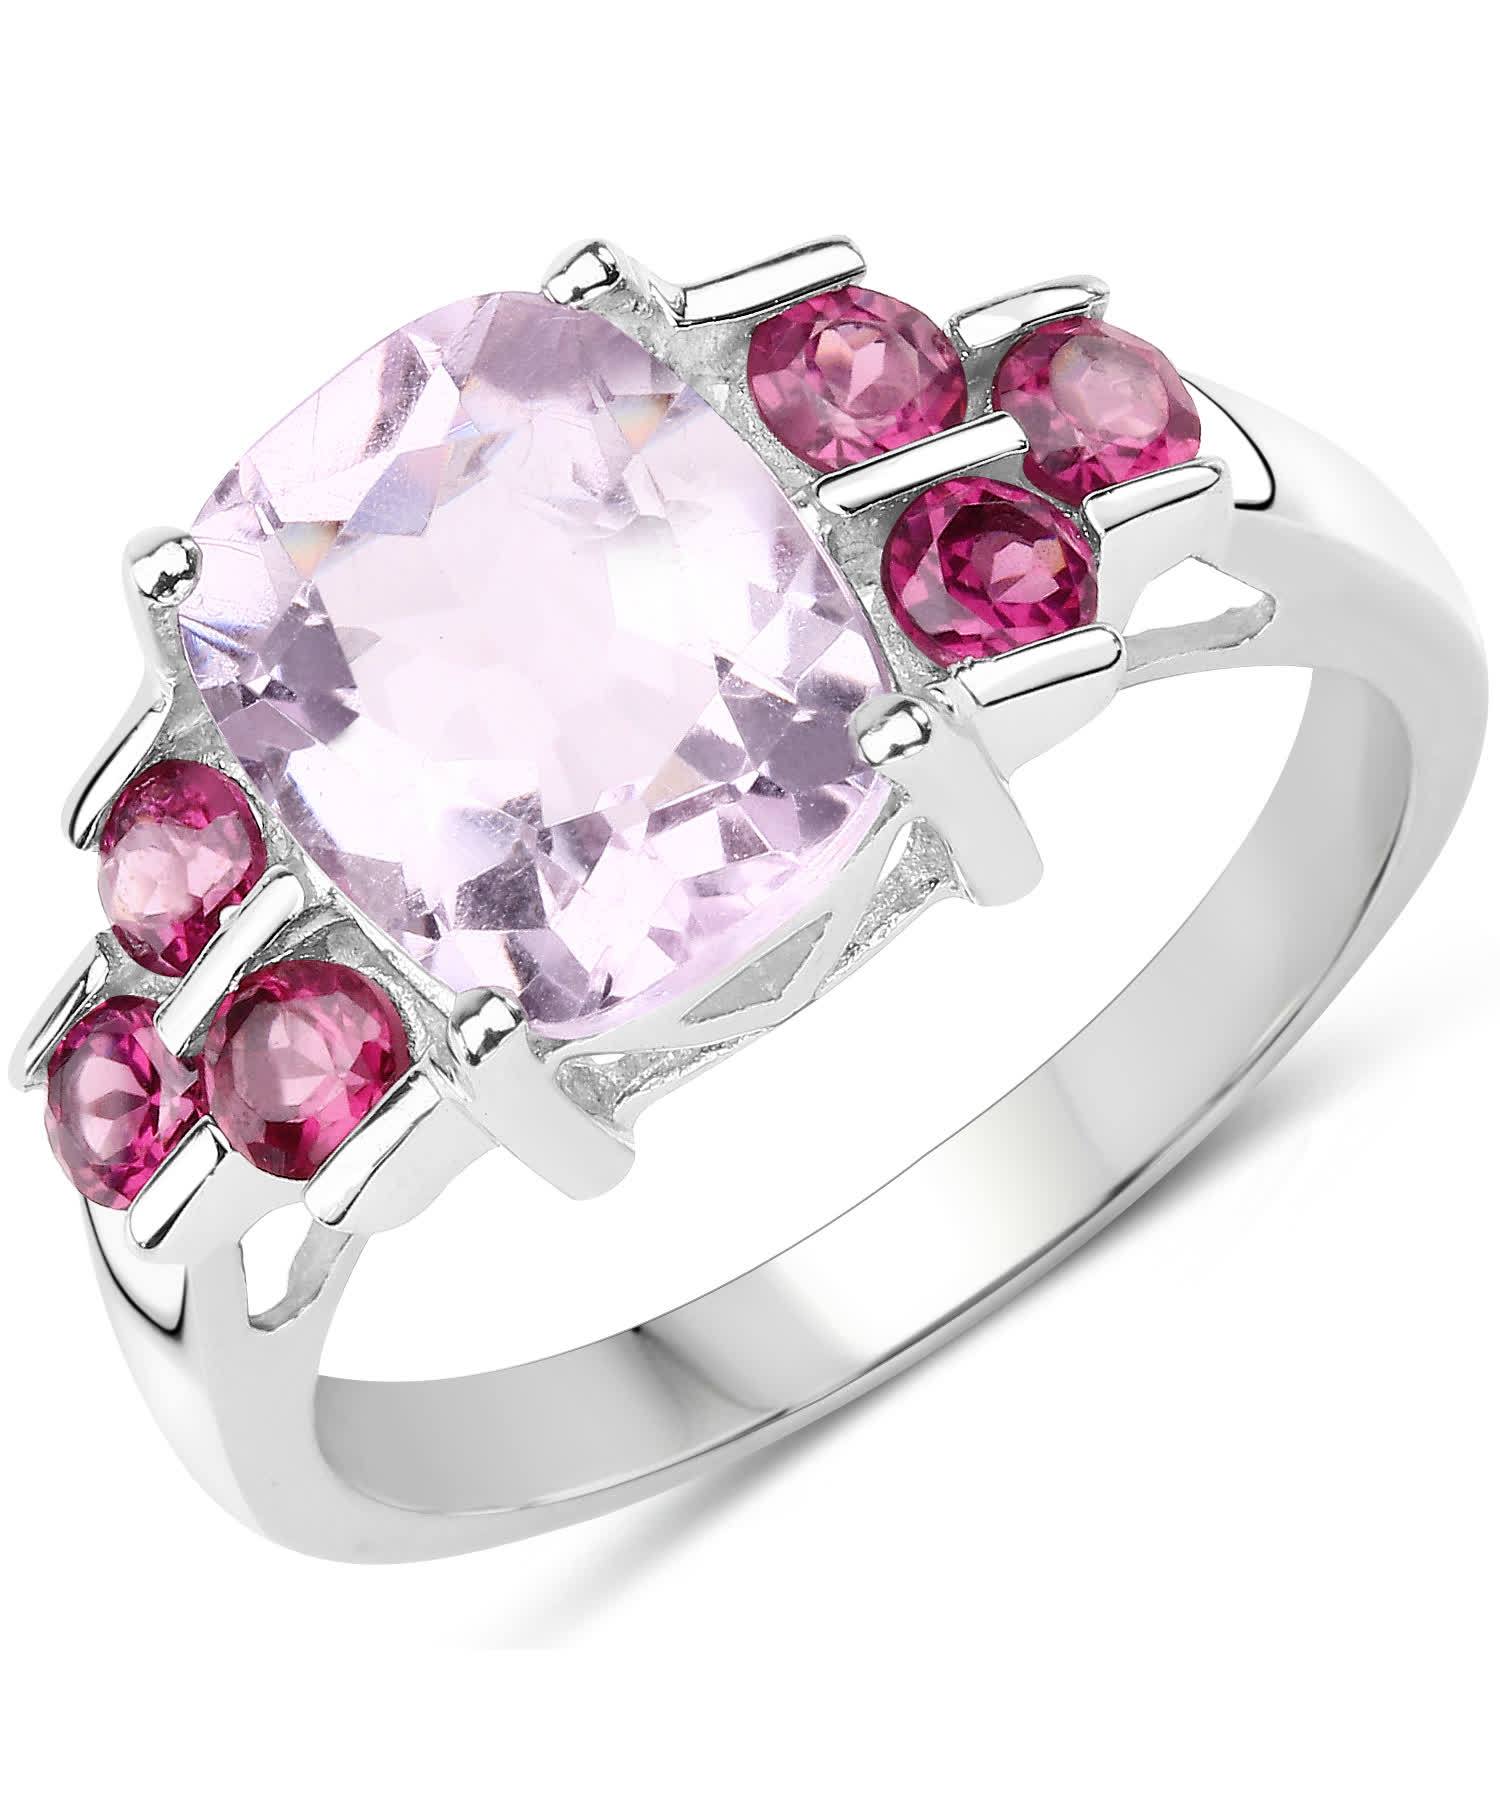 2.83ctw Natural Amethyst and Rhodolite Garnet Rhodium Plated 925 Sterling Silver Right Hand Ring View 1